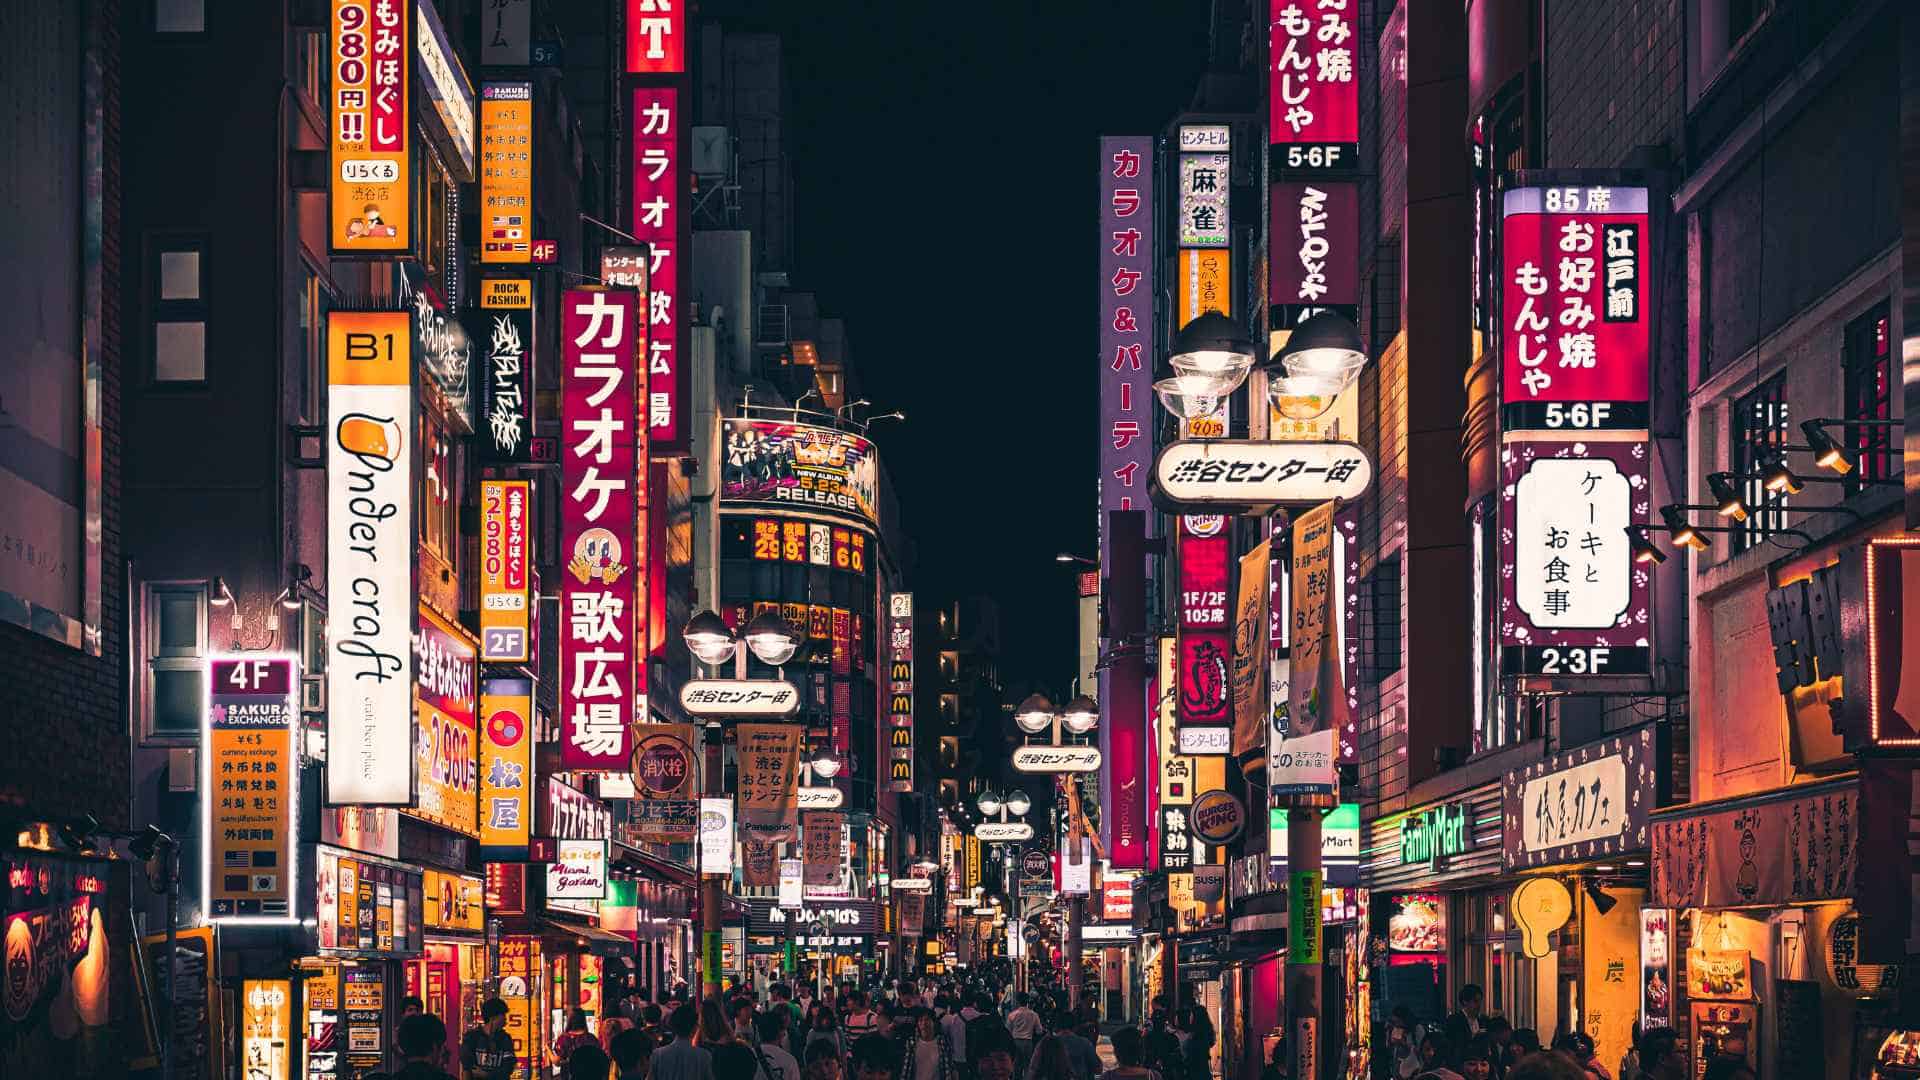 The streets of Japan